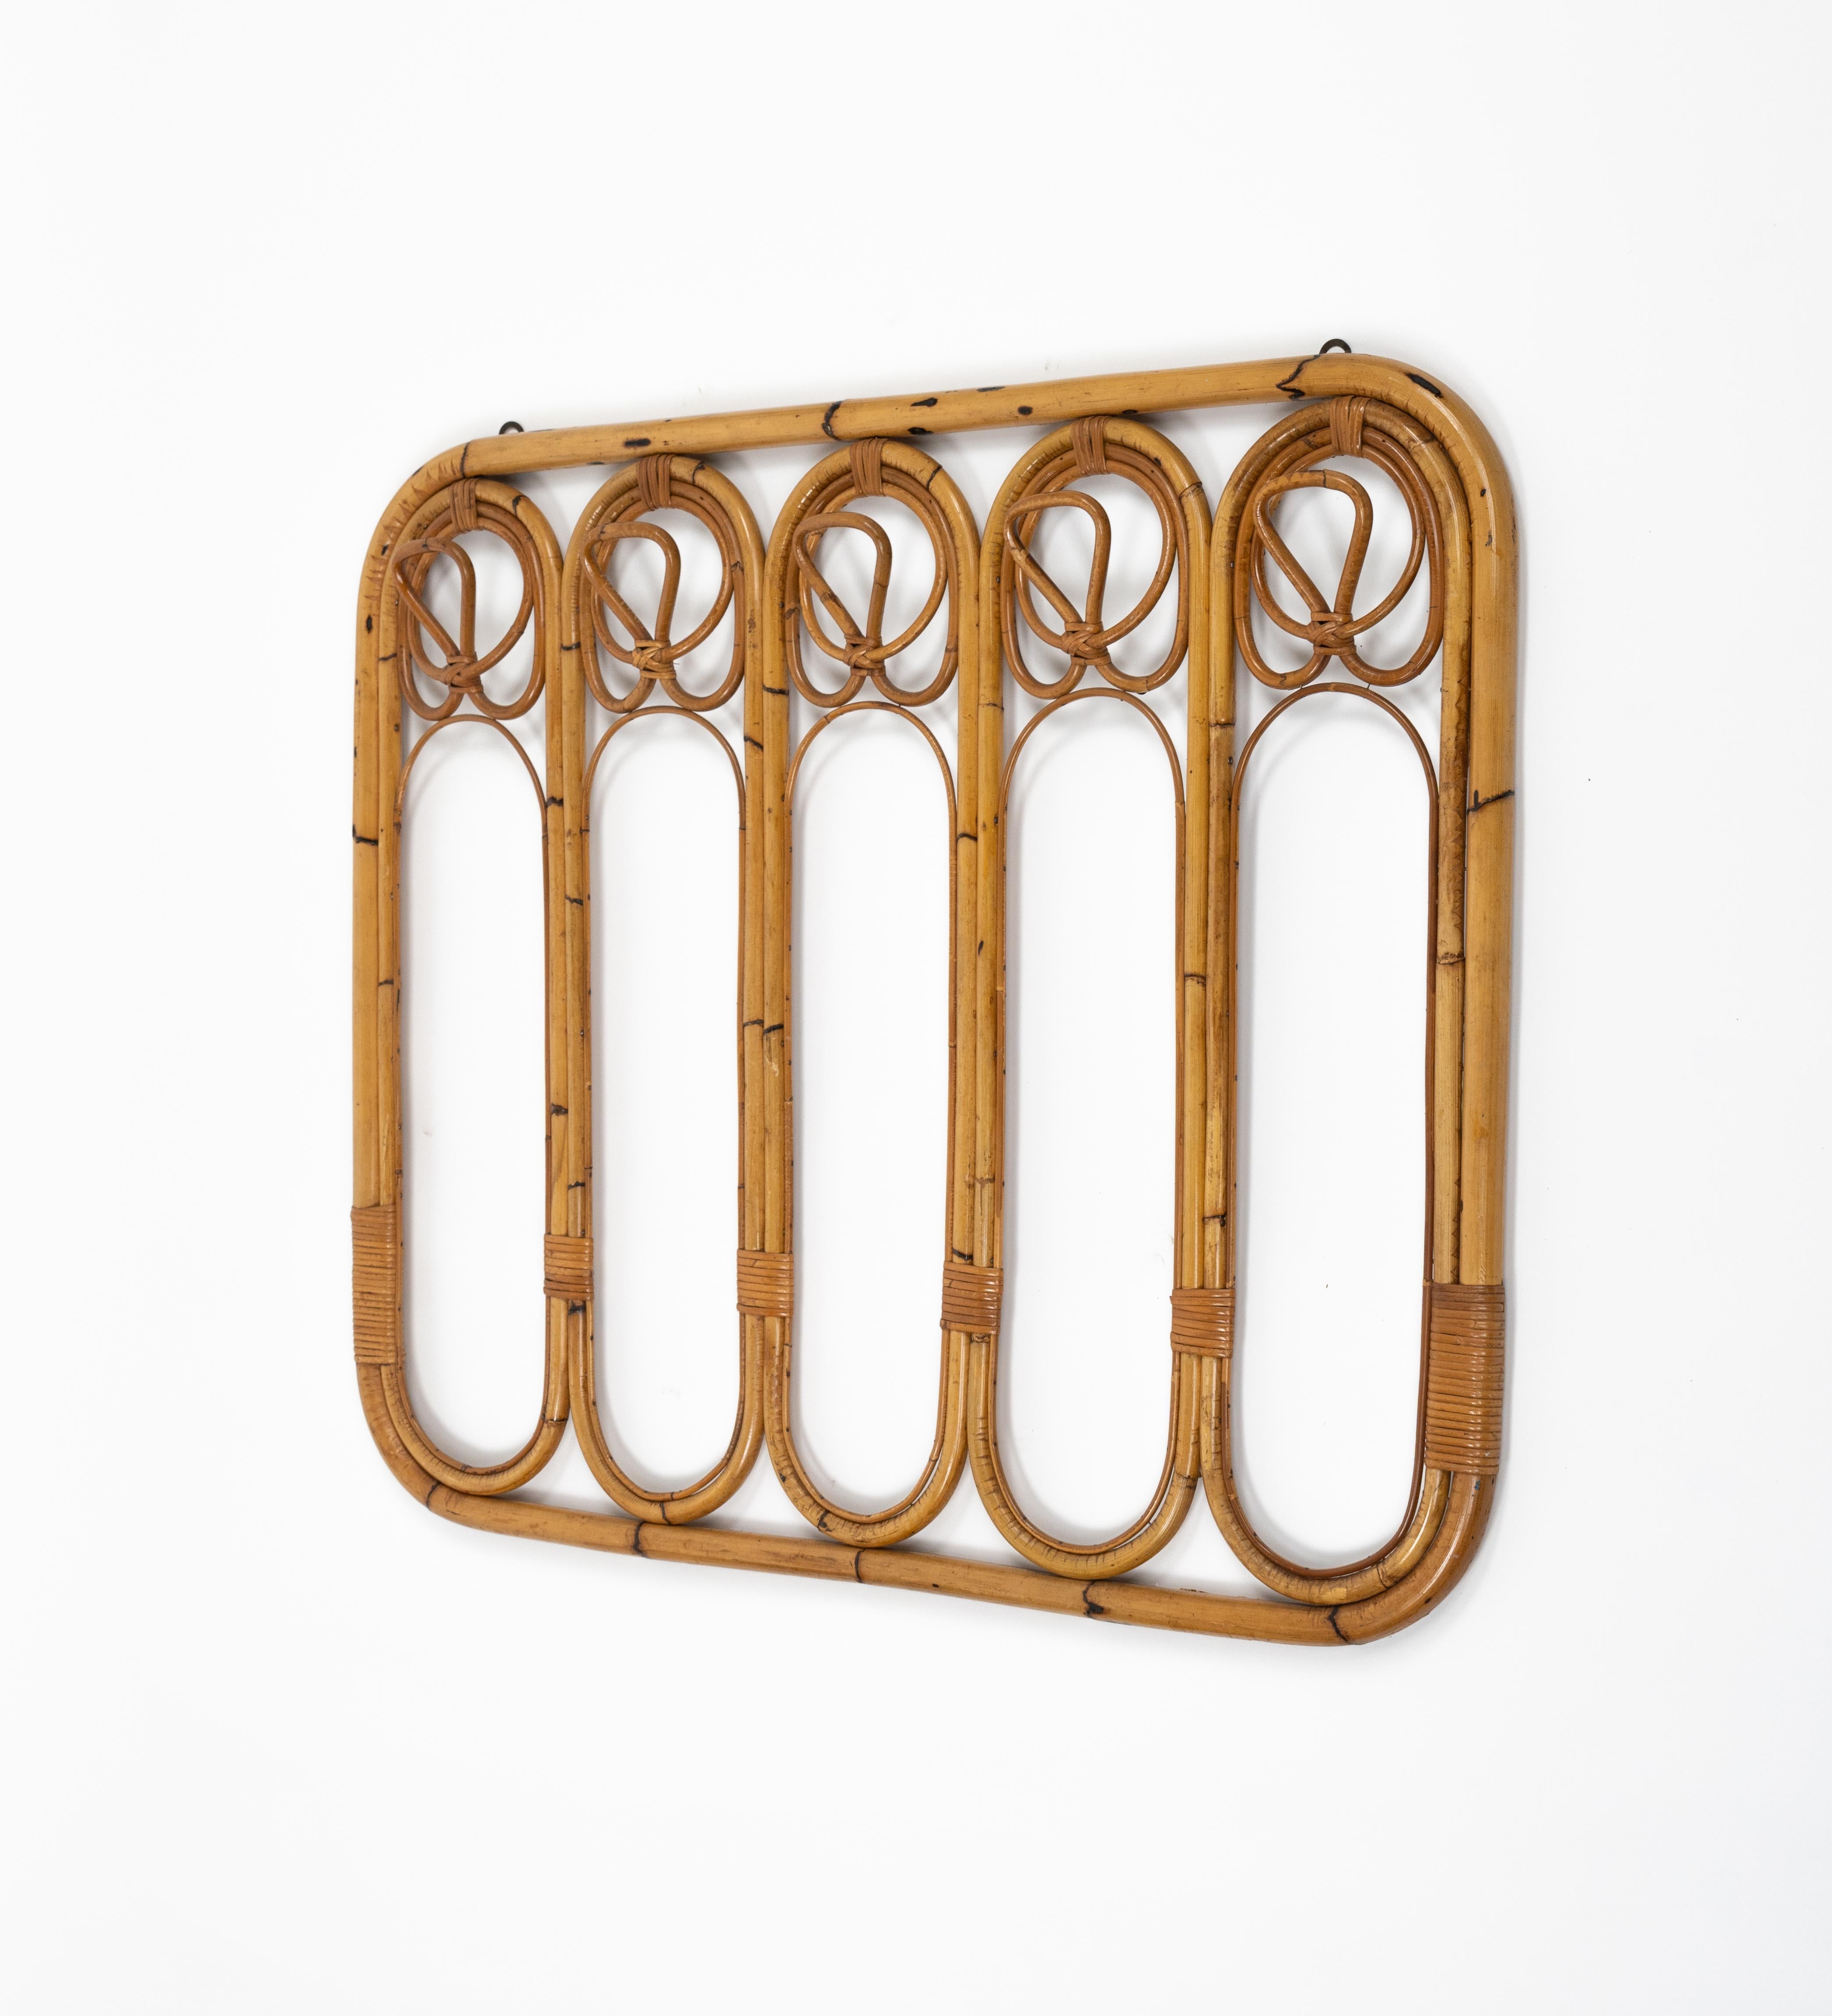 Midcentury Bamboo and Rattan Coat Rack Stand, Italy 1960s For Sale 5